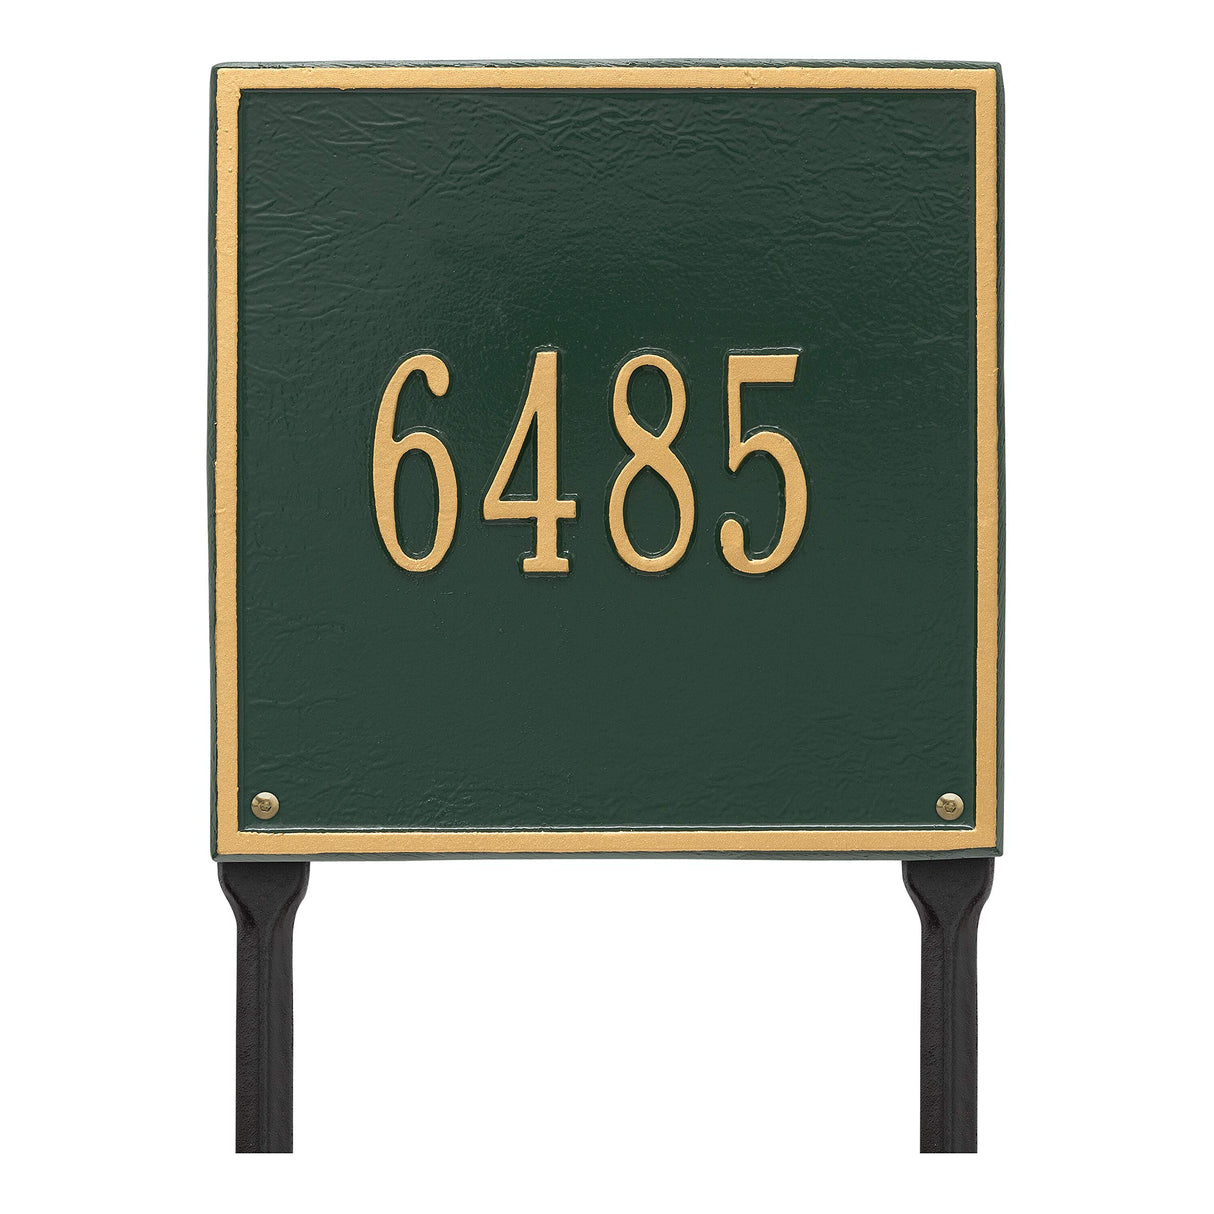 Whitehall 2113GG - Personalized Square Plaque - Standard - Lawn - 1 line